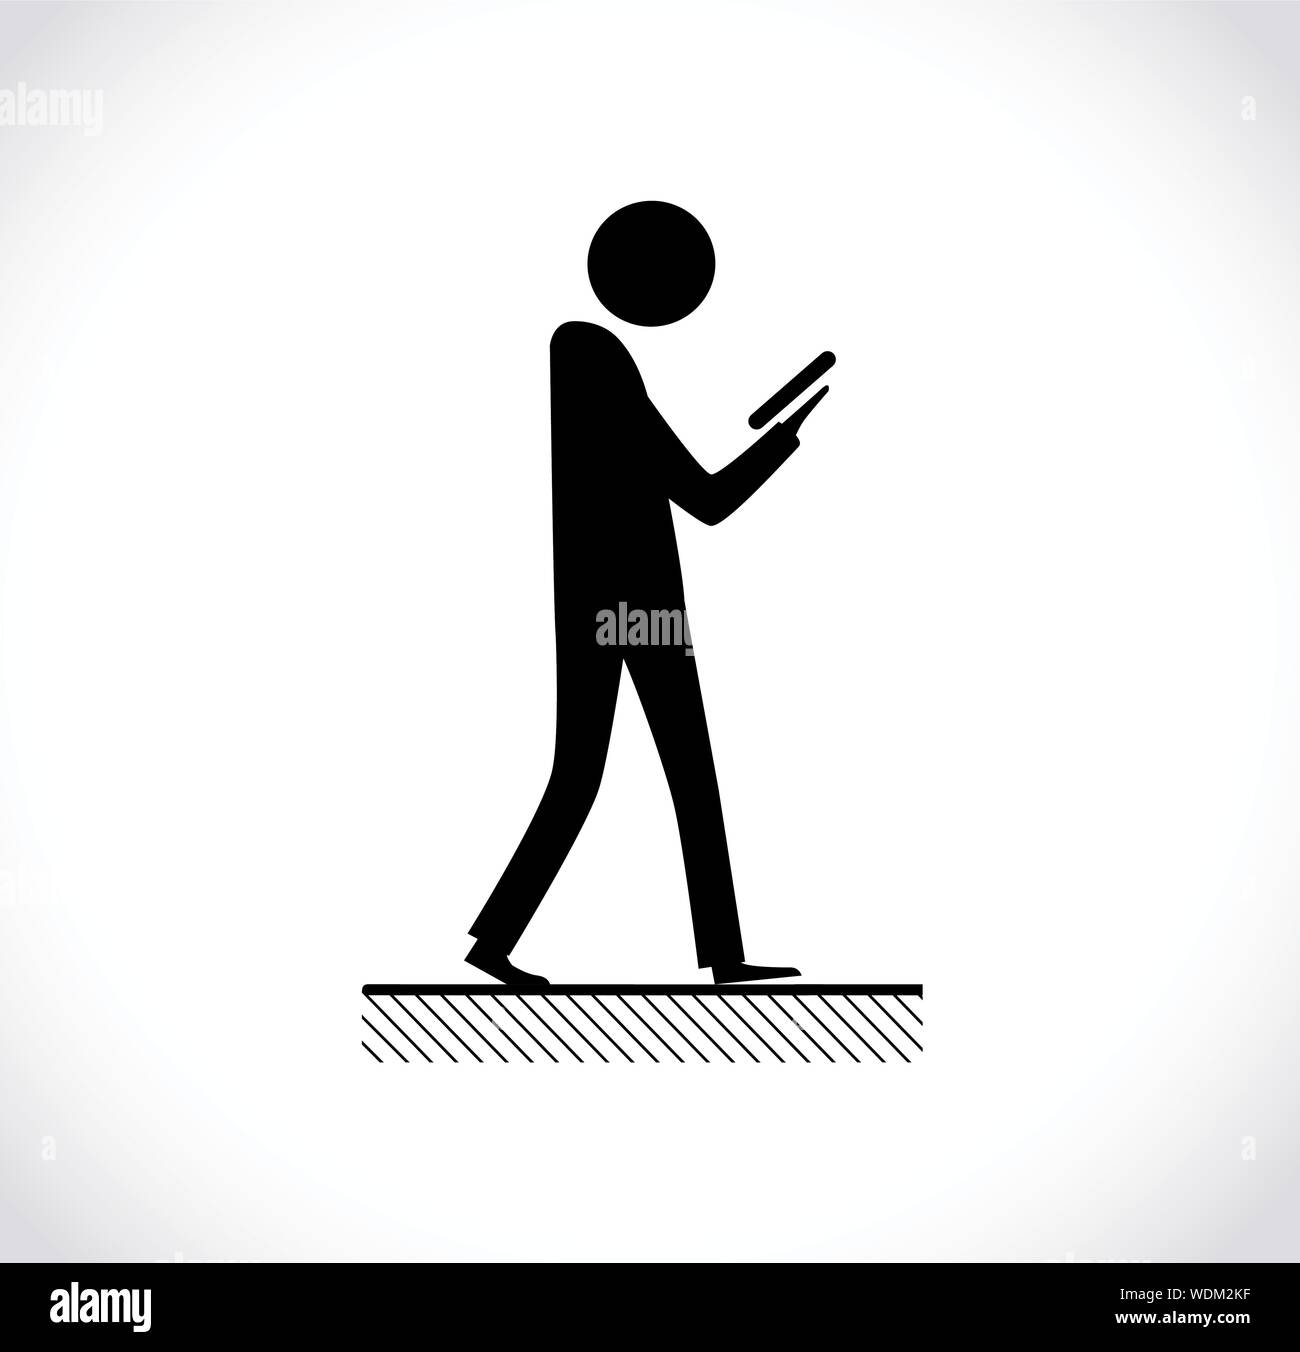 Danger on road sign concept - man with mobile phone walking through crossroad Stock Vector